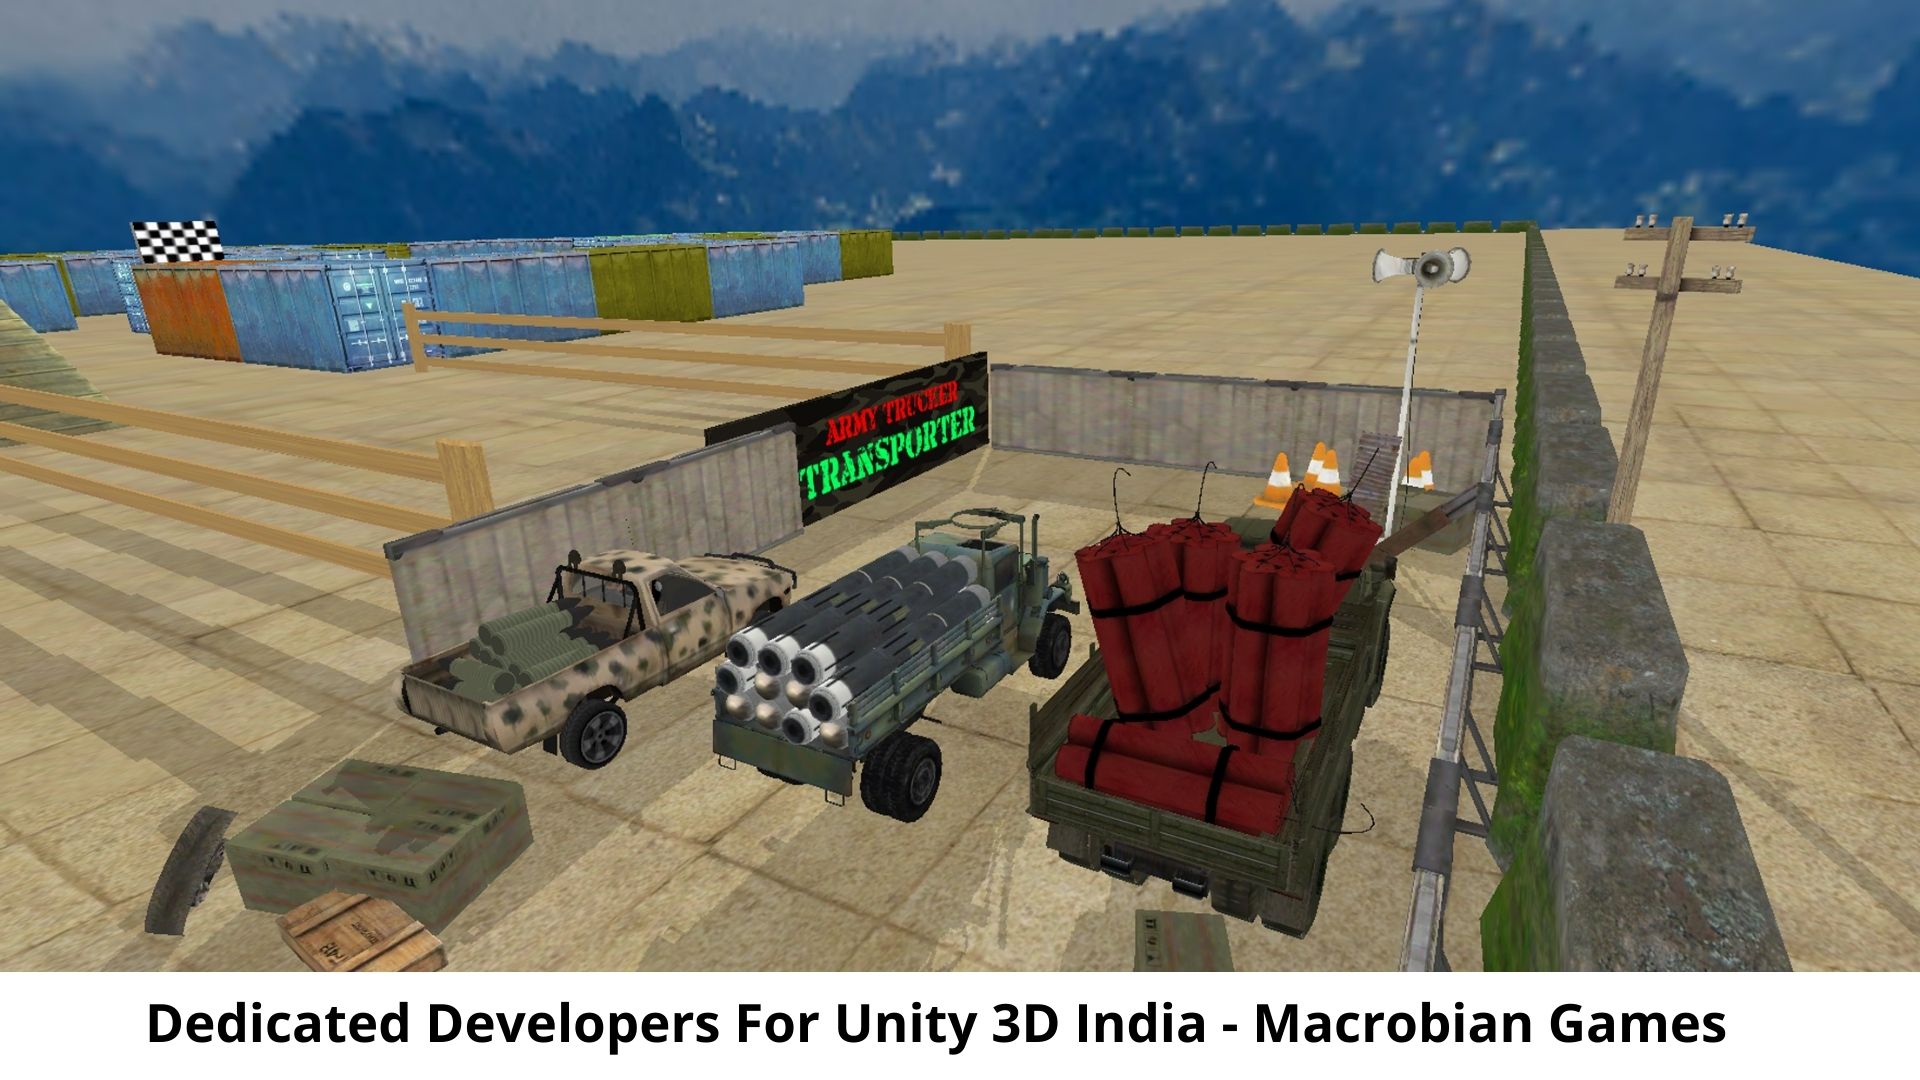 Dedicated Developers For Unity 3D India - Macrobian Games